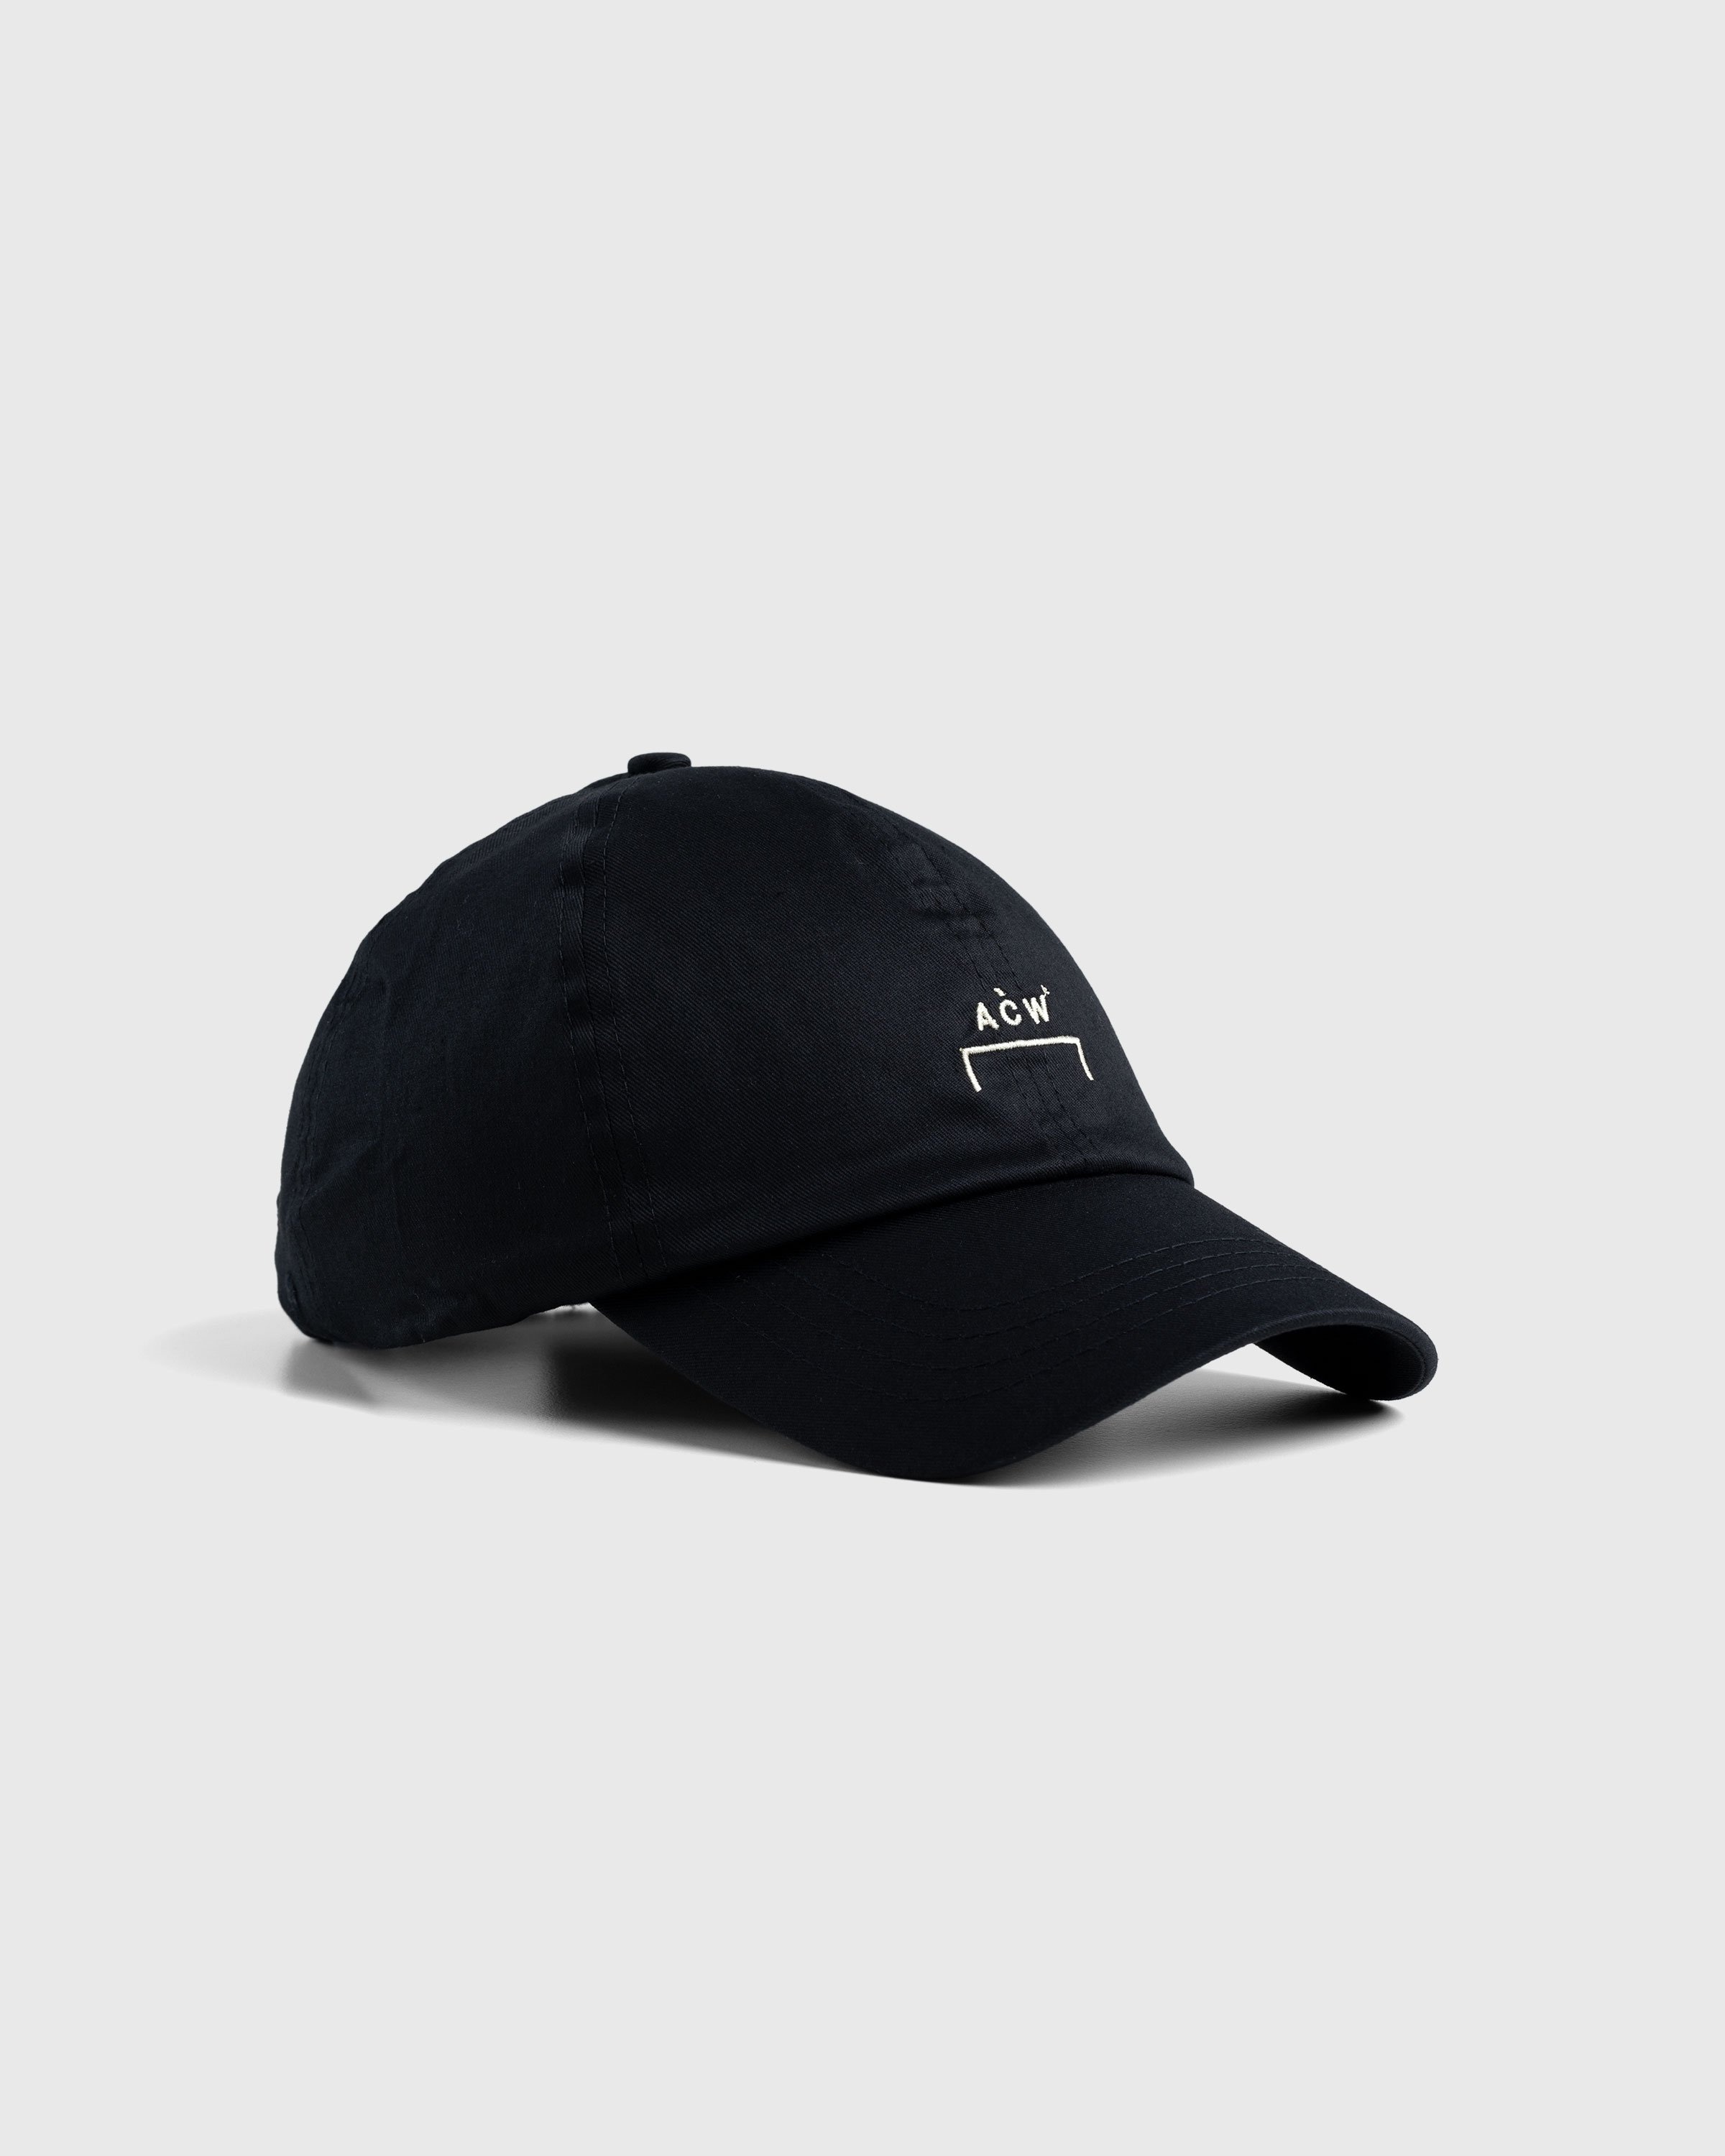 A-Cold-Wall* – Cotton Bracket Cap Black - Hats - here - Image 1